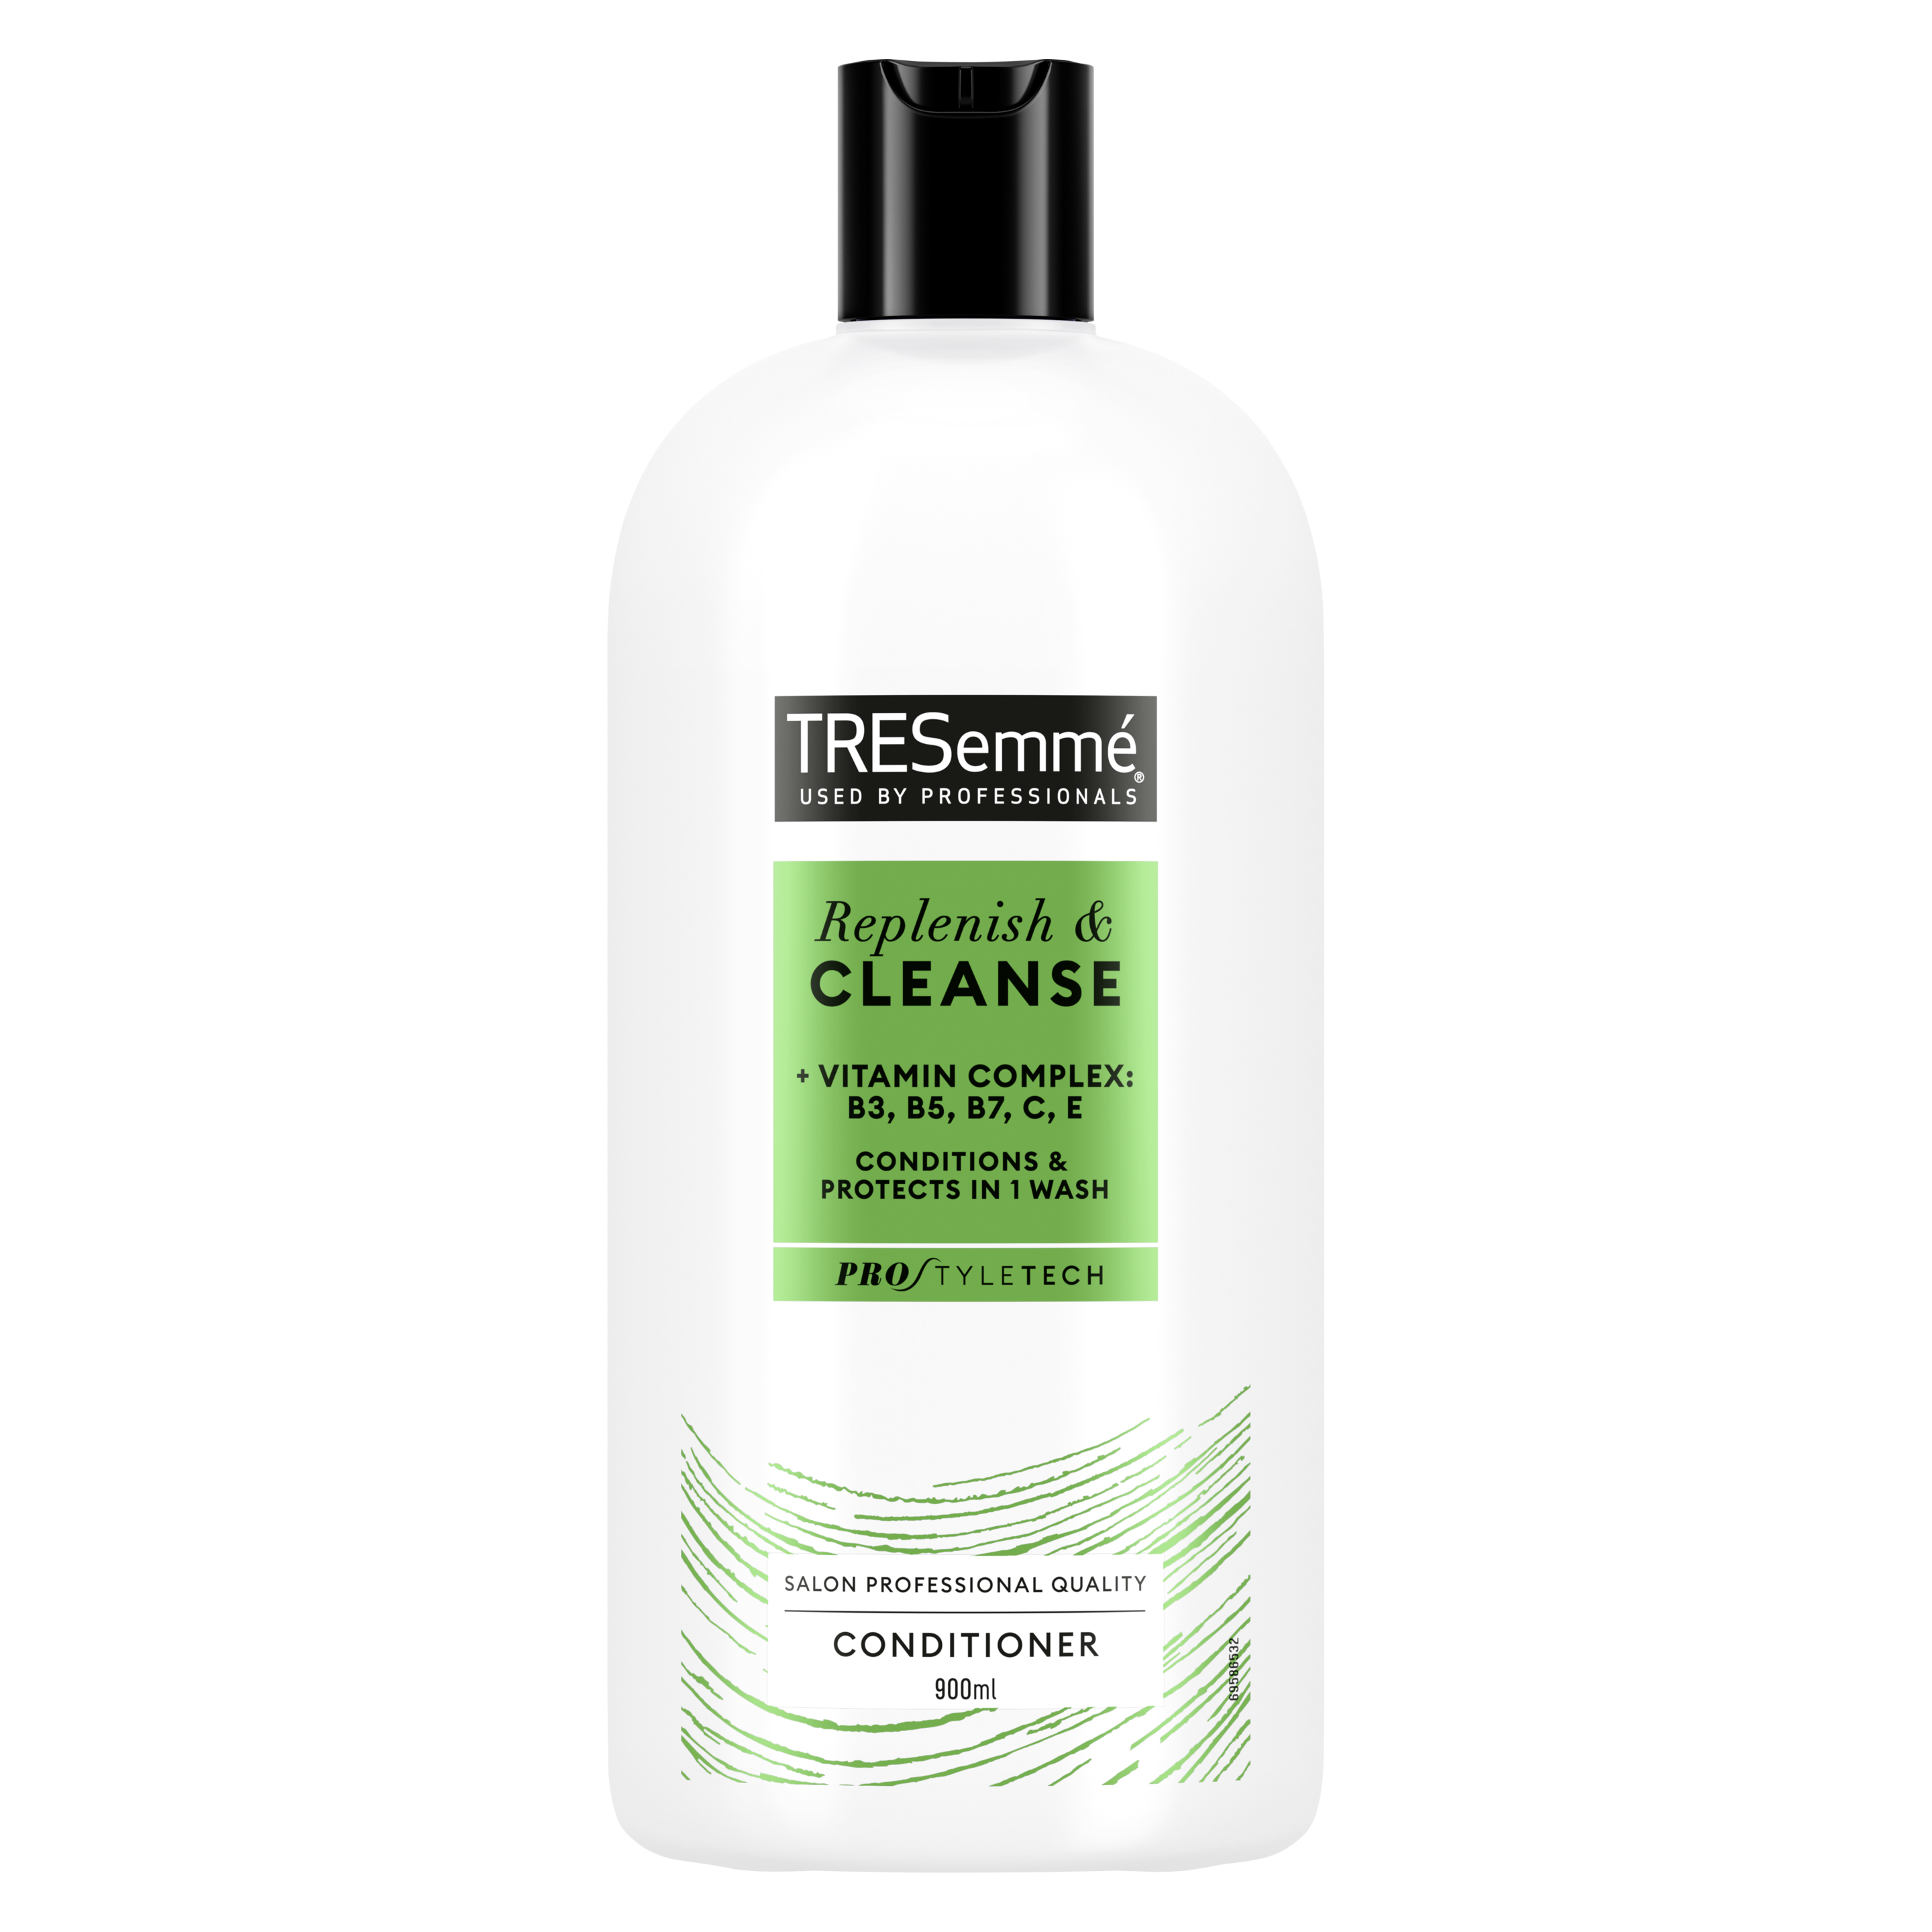 A 900ml bottle of TRESemmé Replenish & Cleanse Conditioner front of pack image